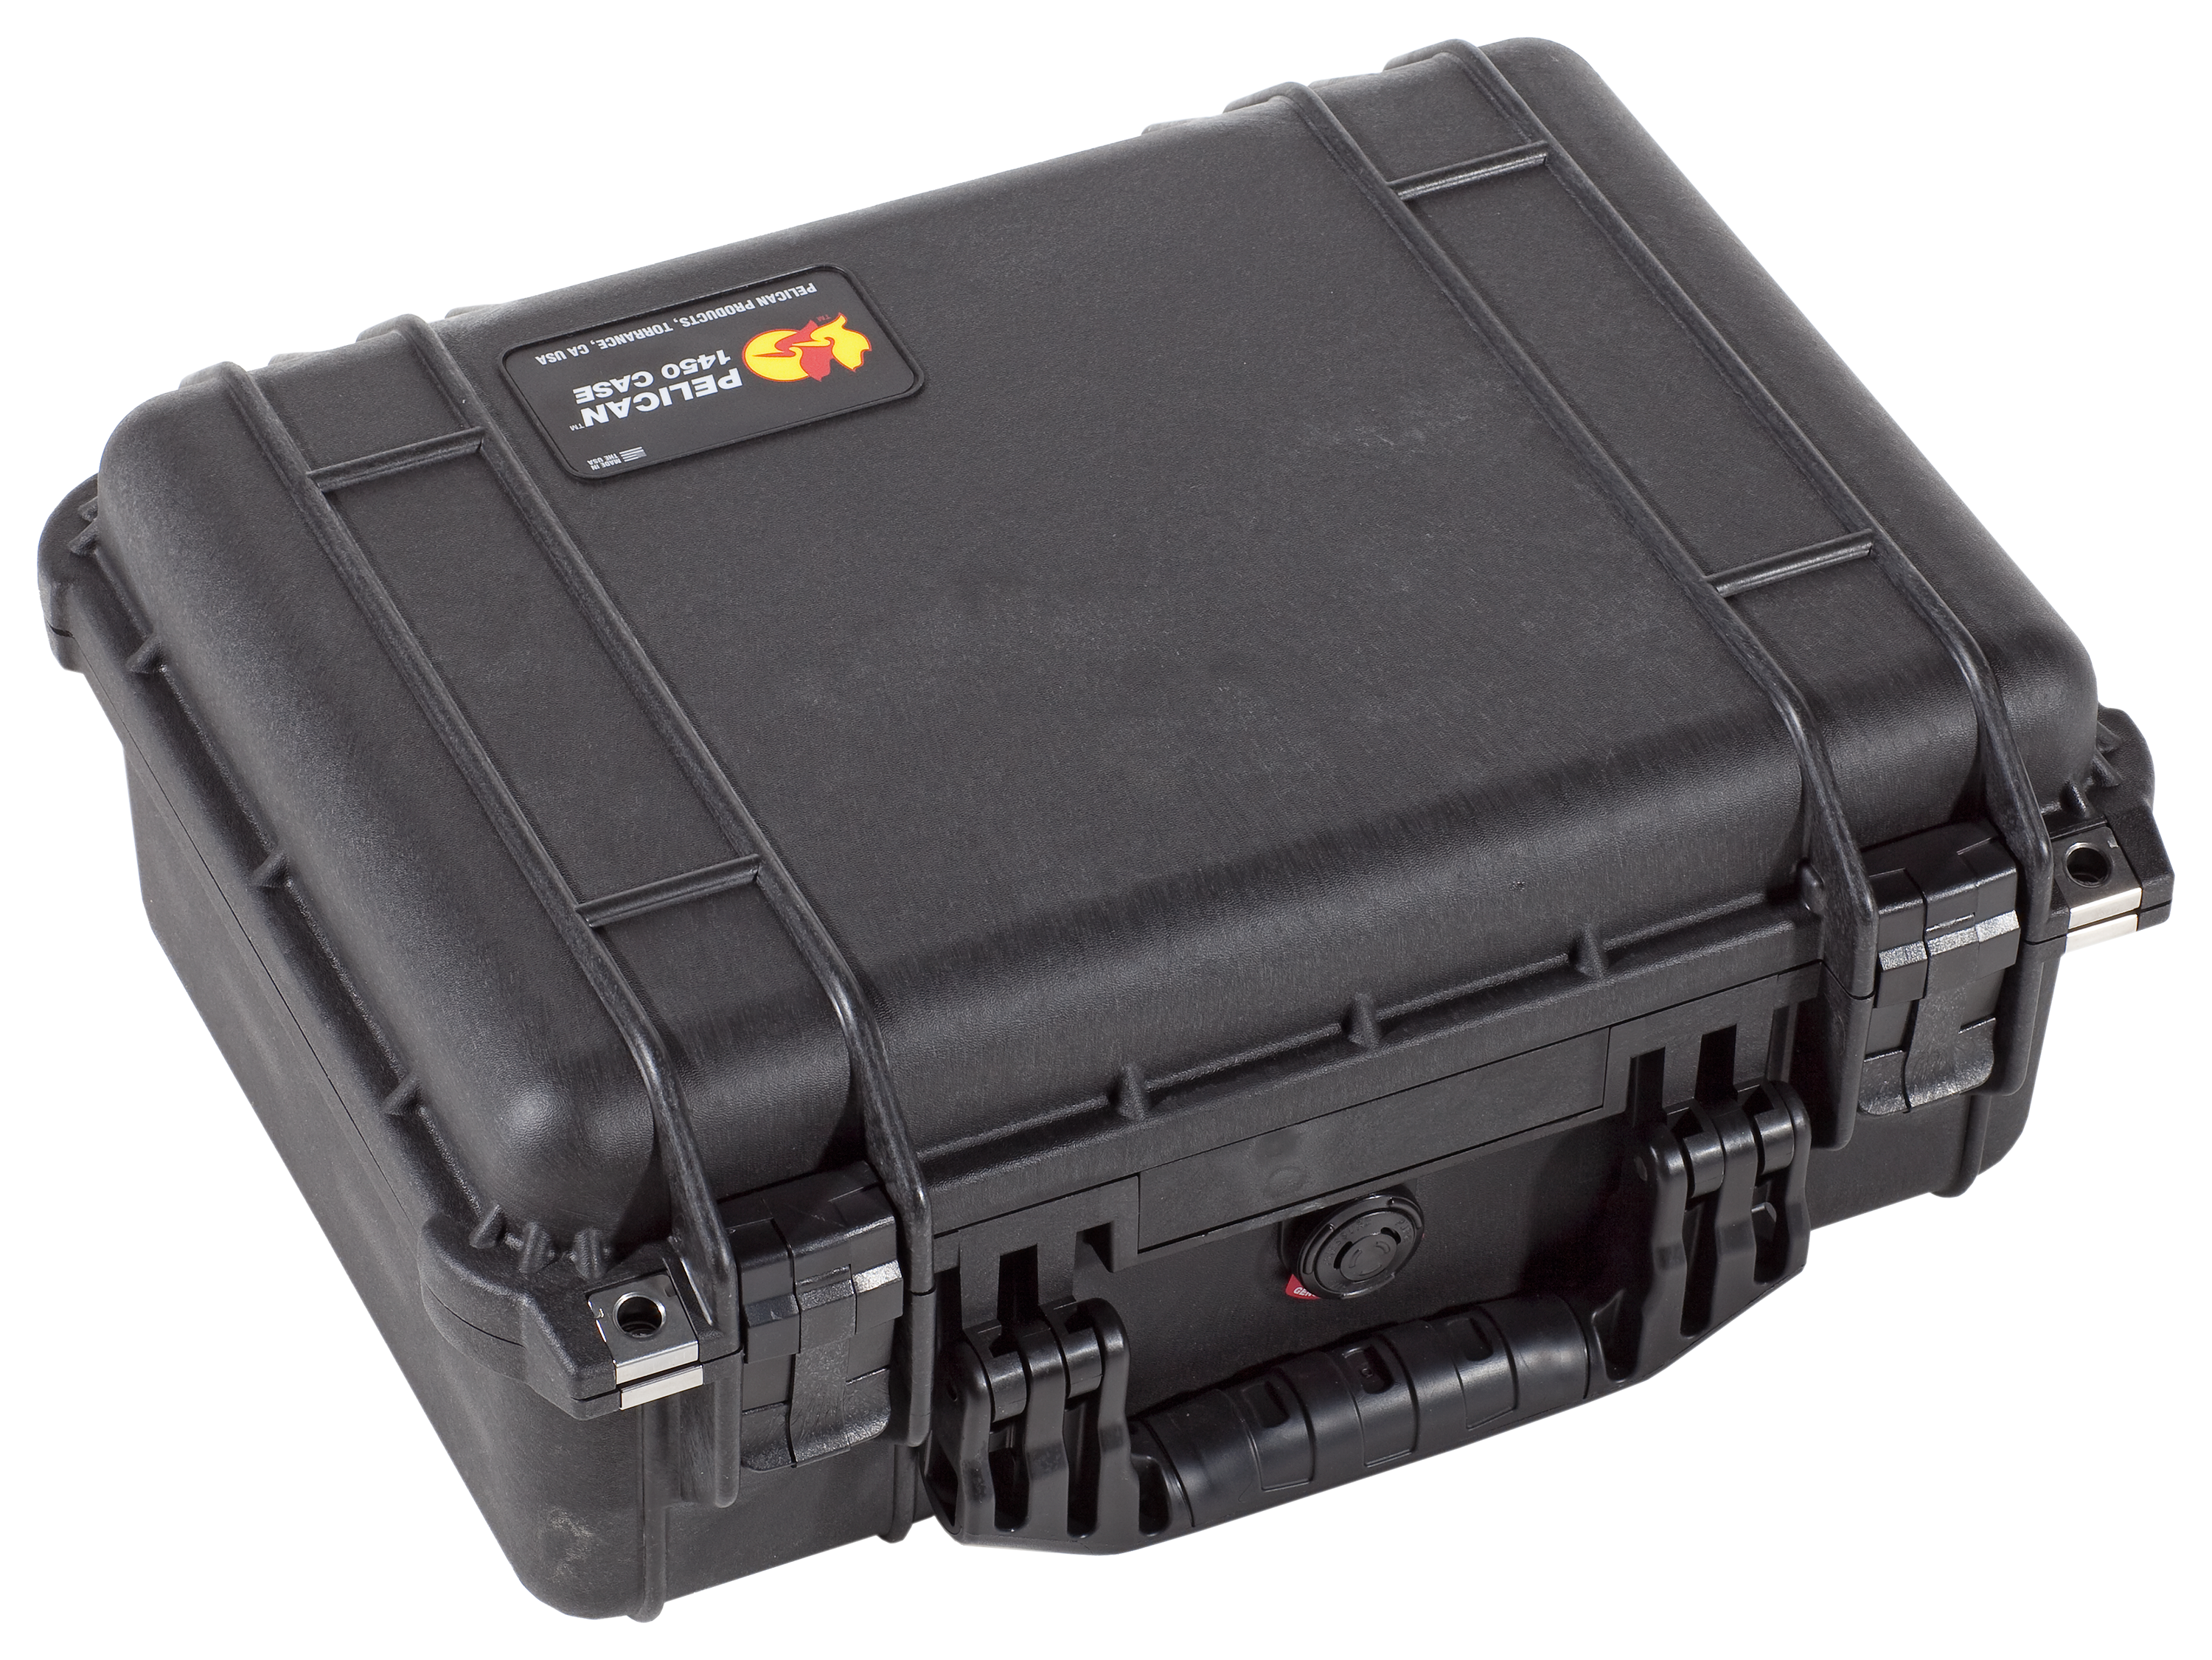 Plano 1450 Guide Series Waterproof Case Small